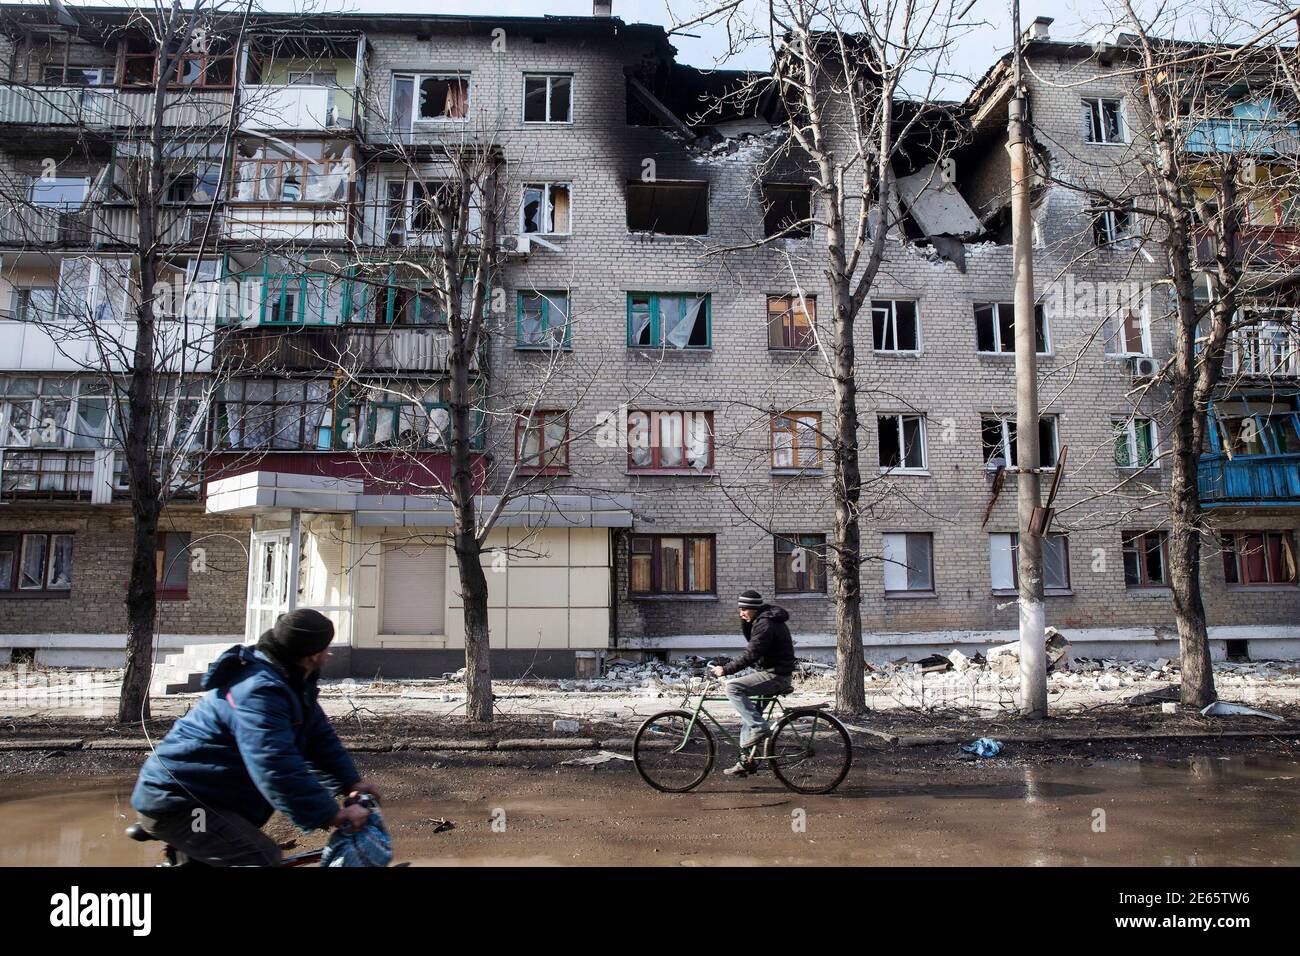 Men ride bicycles past a building which was damaged by fighting in the town of Debaltseve February 23, 2015. Fighting over the railway hub of Debaltseve intensified in the days following a ceasefire deal meant to have taken effect on Feb. 15. Rebels who had encircled the town launched a massive assault, routing all Ukrainian forces by Feb. 18. The battle for the town caught civilians in the crossfire on a scale not yet seen in the war that has killed nearly 6,000 people. Most residential buildings in the town have been damaged by shelling or are burnt out. Picture taken February 23, 2015. REUT Stock Photo